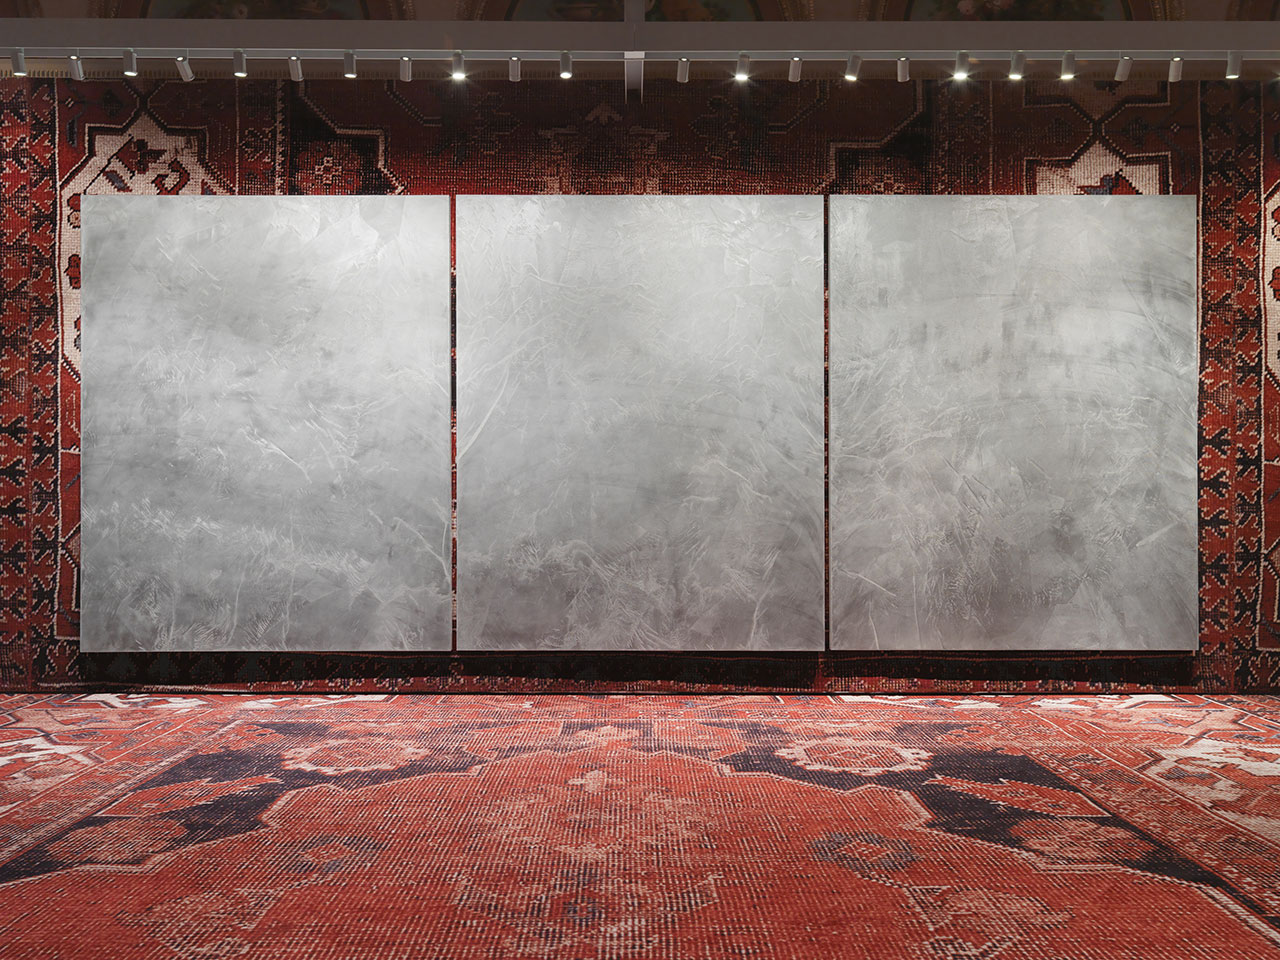 Rudolf Stingel, Untitled, 2012 Installation view at Palazzo Grassi Oil and enamel on canvas.3 panels, each 300 x 242 cm. Pinault Collection.Photo: Stefan Altenburger. Courtesy of the artist.